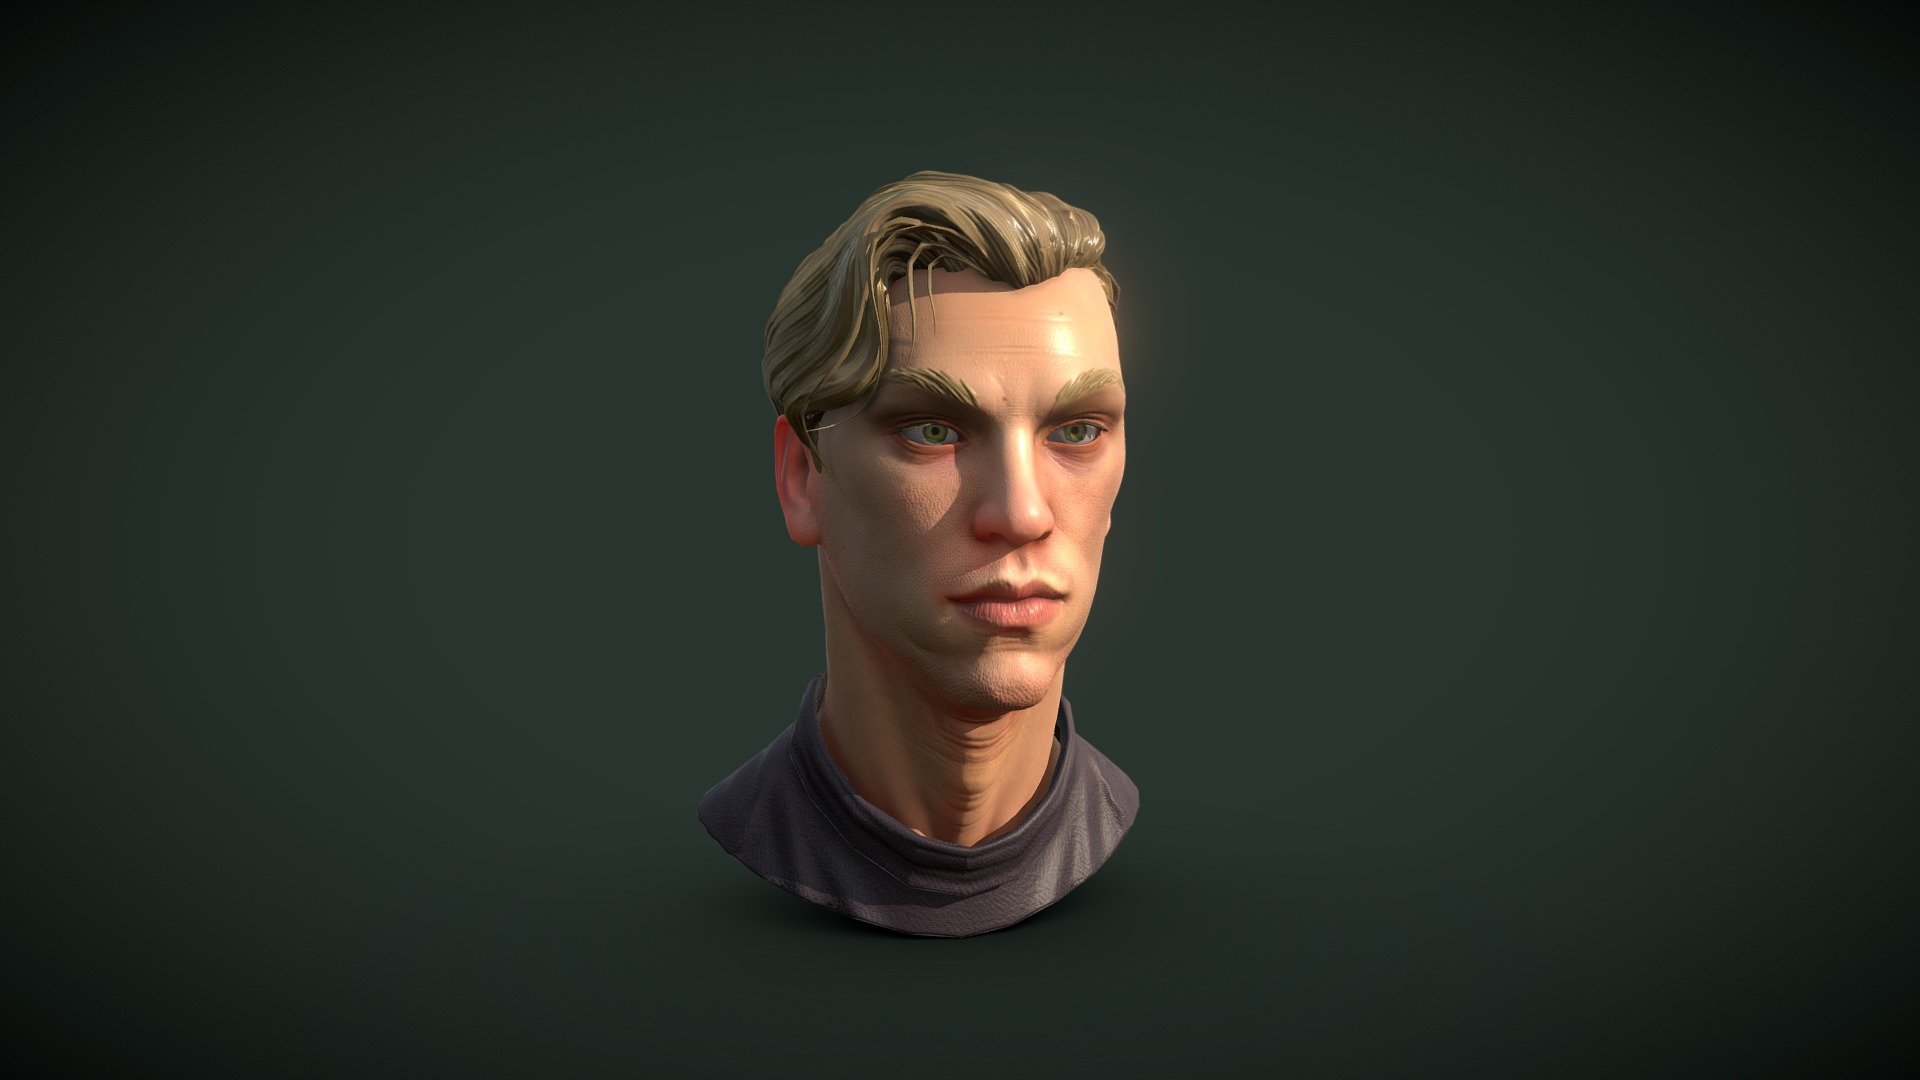 Low Poly face - Dishonored style